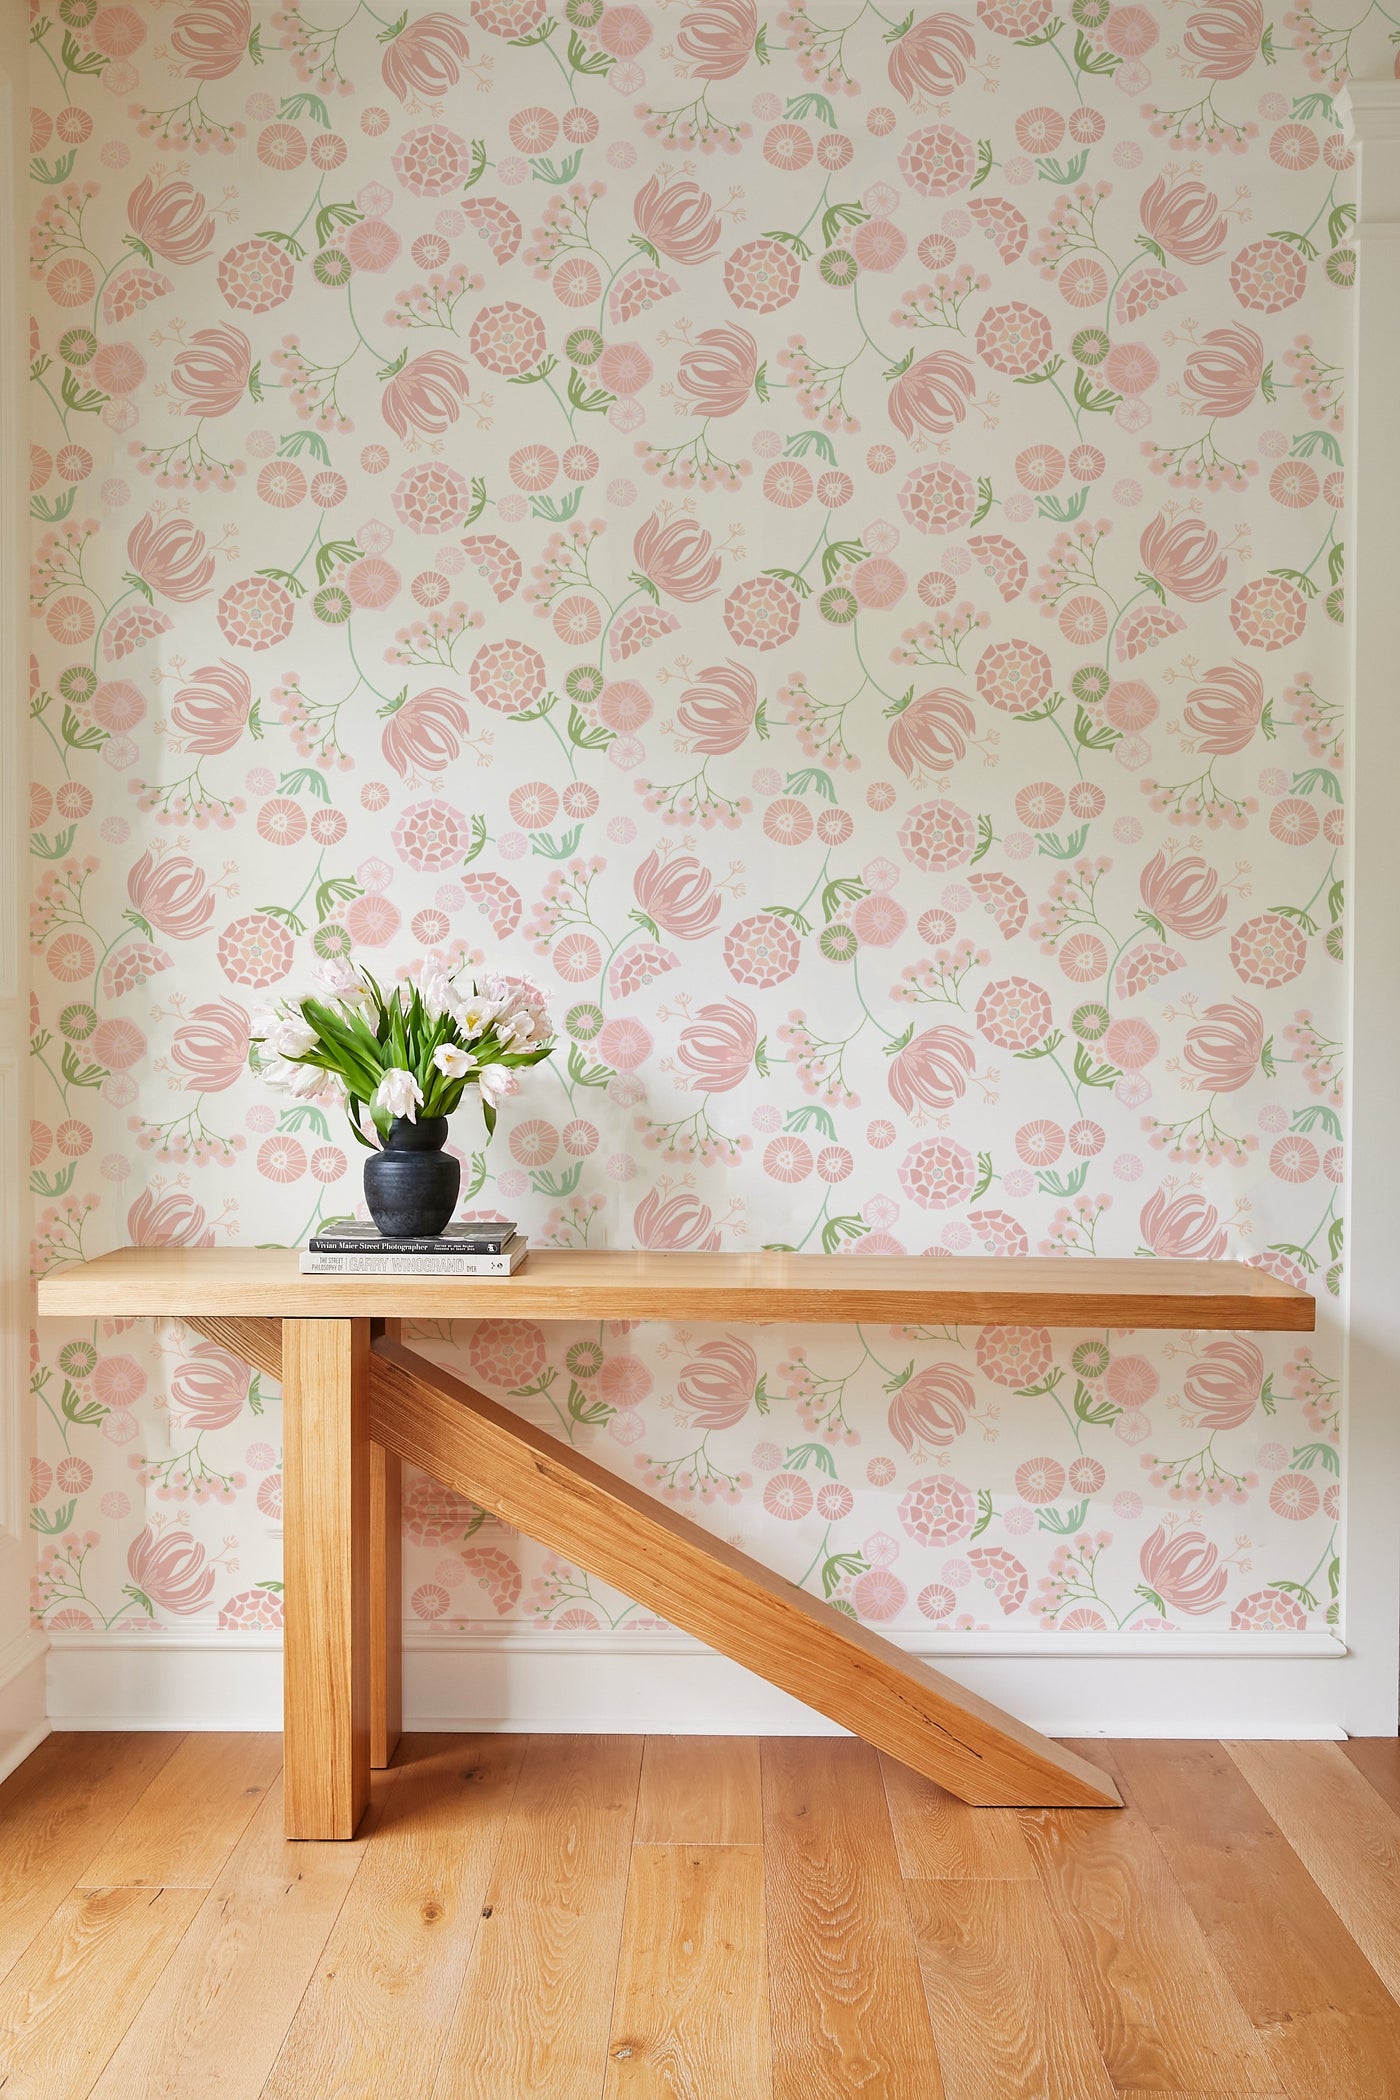 'Mediterranean Floral' Wallpaper by Tea Collection - Pink